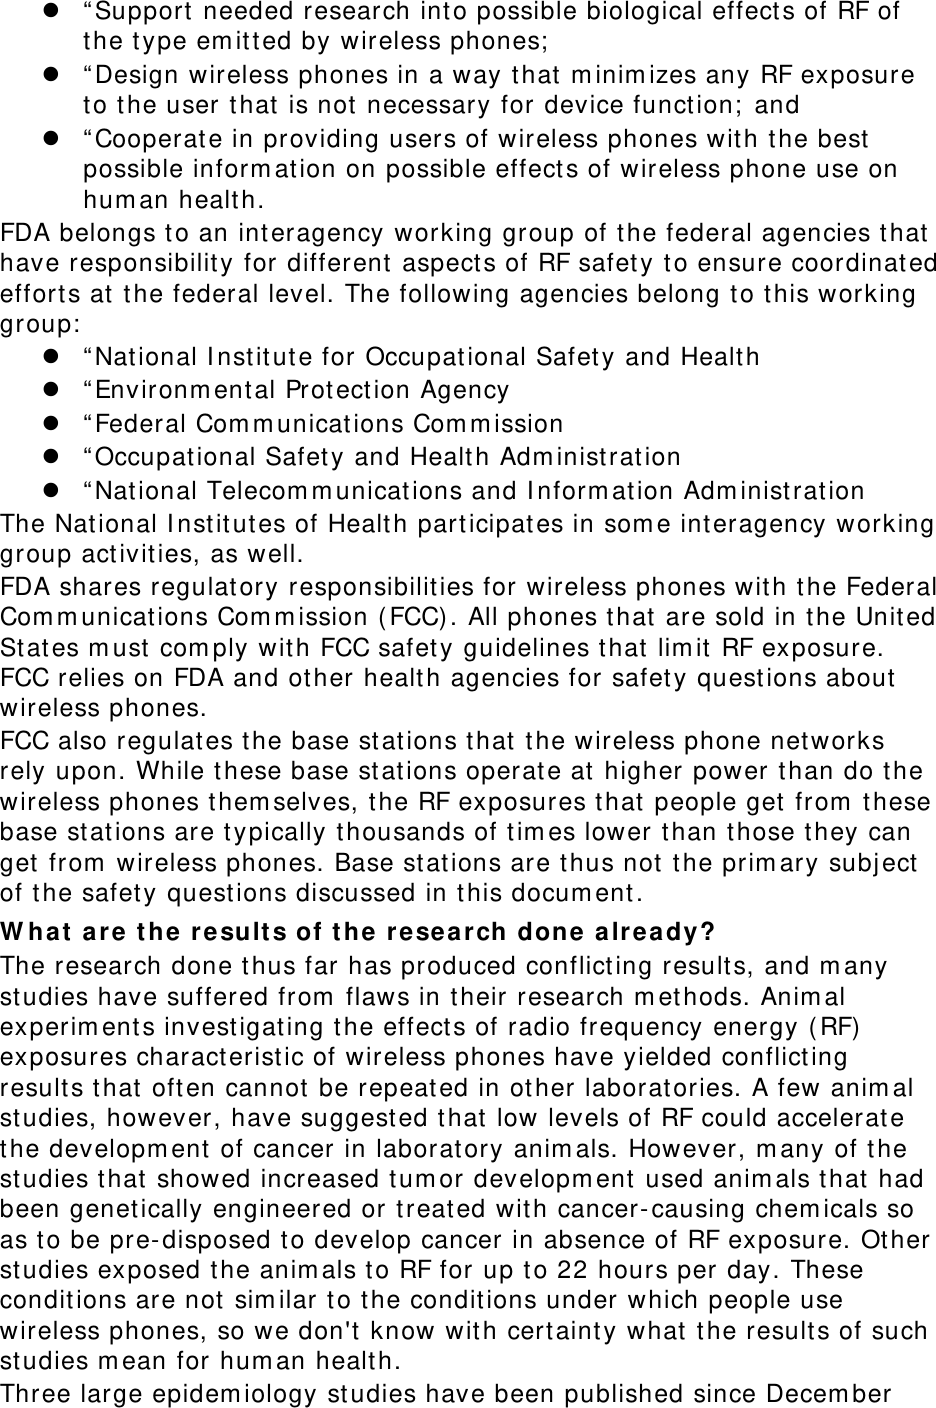  “ Support  needed research int o possible biological effect s of RF of the type em itt ed by wireless phones;   “ Design wireless phones in a way that m inim izes any RF exposure to the user t hat  is not  necessary for device function;  and  “ Cooperat e in providing users of wireless phones with t he best possible inform at ion on possible effect s of wireless phone use on hum an health. FDA belongs to an interagency working group of t he federal agencies that have responsibilit y for different  aspect s of RF safet y to ensure coordinat ed efforts at  t he federal level. The following agencies belong t o t his working group:   “ Nat ional I nst itute for Occupat ional Safet y and Health  “ Environm ent al Protection Agency  “ Federal Com m unicat ions Com m ission  “ Occupat ional Safet y and Healt h Adm inist rat ion  “ Nat ional Telecom m unications and I nform at ion Adm inist rat ion The National I nstit ut es of Healt h part icipat es in som e int eragency working group act ivit ies, as well. FDA shares regulat ory responsibilit ies for wireless phones wit h t he Federal Com m unications Com m ission ( FCC). All phones t hat  are sold in t he Unit ed St at es m ust  com ply wit h FCC safet y guidelines that  lim it  RF exposure. FCC relies on FDA and ot her healt h agencies for safet y quest ions about  wireless phones. FCC also regulat es t he base st at ions t hat  the wireless phone networks rely upon. While these base st ations operat e at  higher power t han do the wireless phones t hem selves, t he RF exposures that  people get  from  t hese base stat ions are t ypically thousands of t im es lower than t hose t hey can get  from  wireless phones. Base stat ions are t hus not  the prim ary subj ect  of the safet y quest ions discussed in this docum ent . W hat  a re  t he  result s of t he rese a r ch done  a lr e a dy? The research done t hus far has produced conflicting result s, and m any studies have suffered from  flaws in their research m et hods. Anim al experim ents invest igating t he effect s of radio frequency energy ( RF)  exposures charact erist ic of wireless phones have yielded conflict ing result s t hat  oft en cannot be repeat ed in ot her laborat ories. A few anim al studies, however, have suggested t hat  low levels of RF could accelerat e the developm ent of cancer in laborat ory anim als. However, m any of the studies that showed increased t um or developm ent  used anim als t hat  had been genet ically engineered or t reated wit h cancer- causing chem icals so as t o be pre- disposed t o develop cancer in absence of RF exposure. Ot her studies exposed t he anim als to RF for up t o 22 hours per day. These conditions are not  sim ilar t o t he condit ions under which people use wireless phones, so we don&apos;t know wit h cert aint y what  the result s of such studies m ean for hum an health. Three large epidem iology st udies have been published since Decem ber 